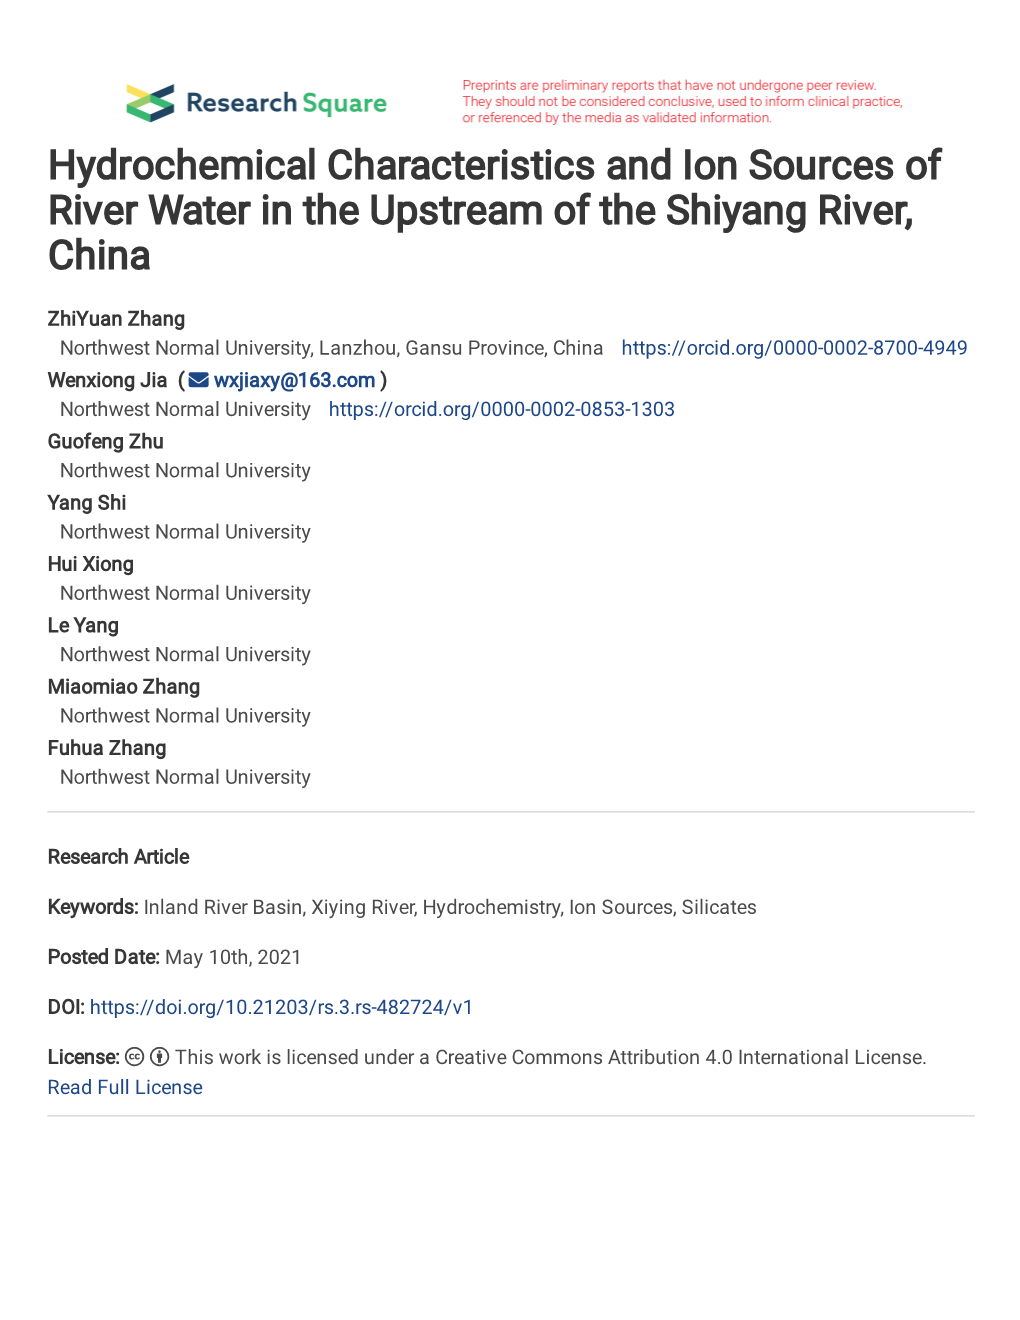 Hydrochemical Characteristics and Ion Sources of River Water in the Upstream of the Shiyang River, China